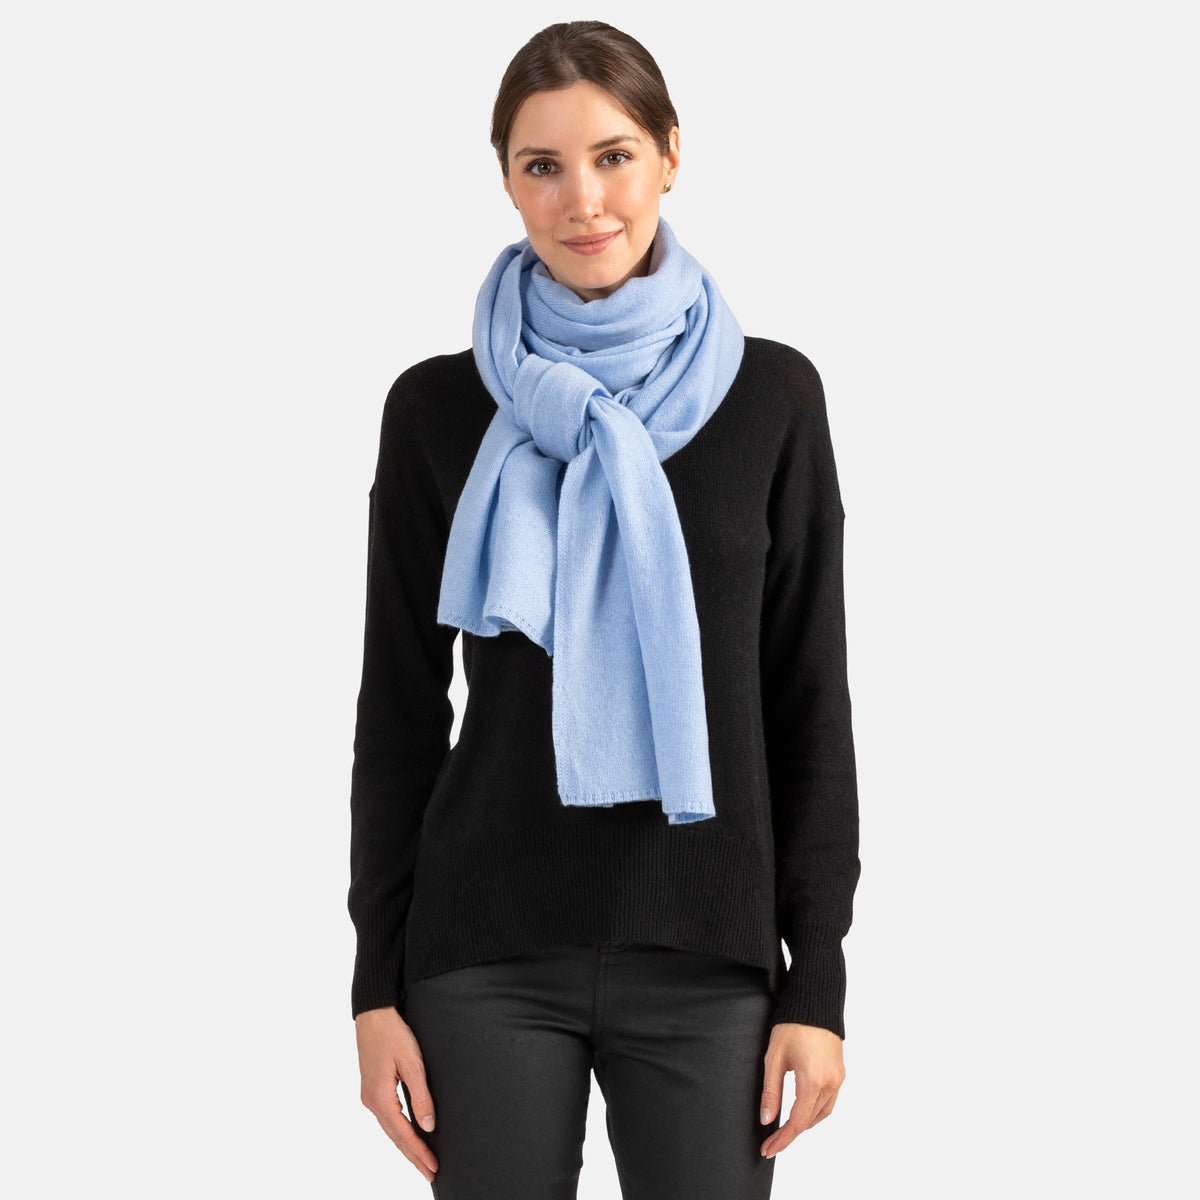 Picture of a woman wearing a light blue cashmere jersey knitted oversize scarf or travel wrap.